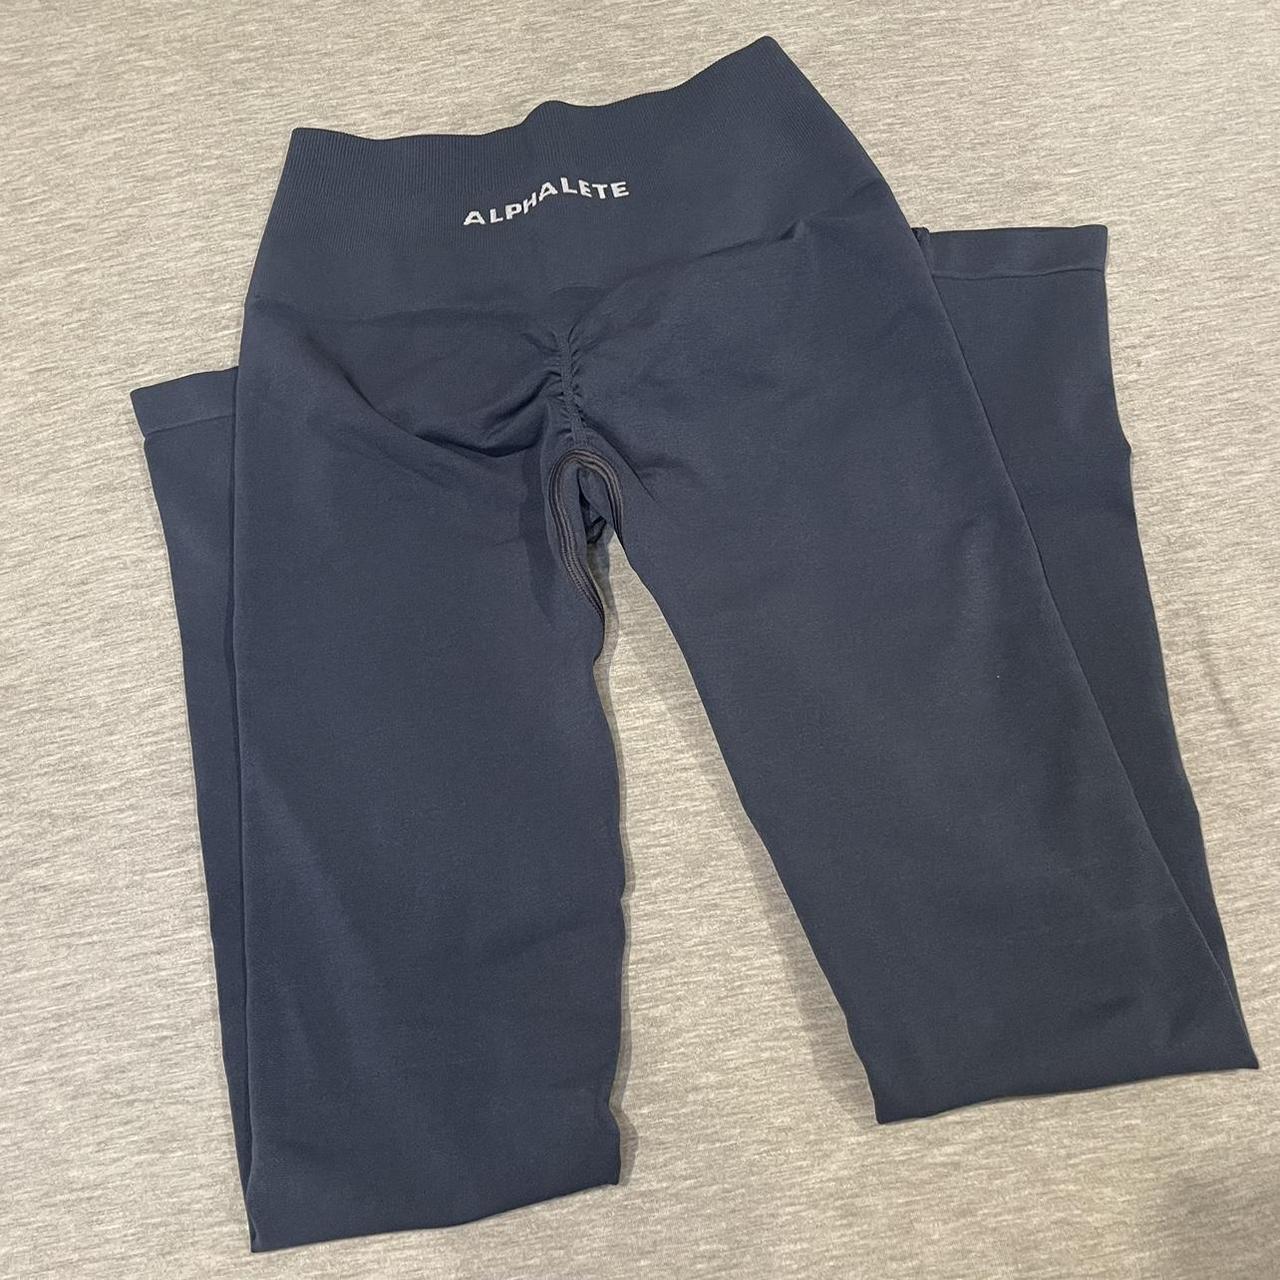 New With Packaging Alphalete Amplify Leggings Navy Whale Blue Size